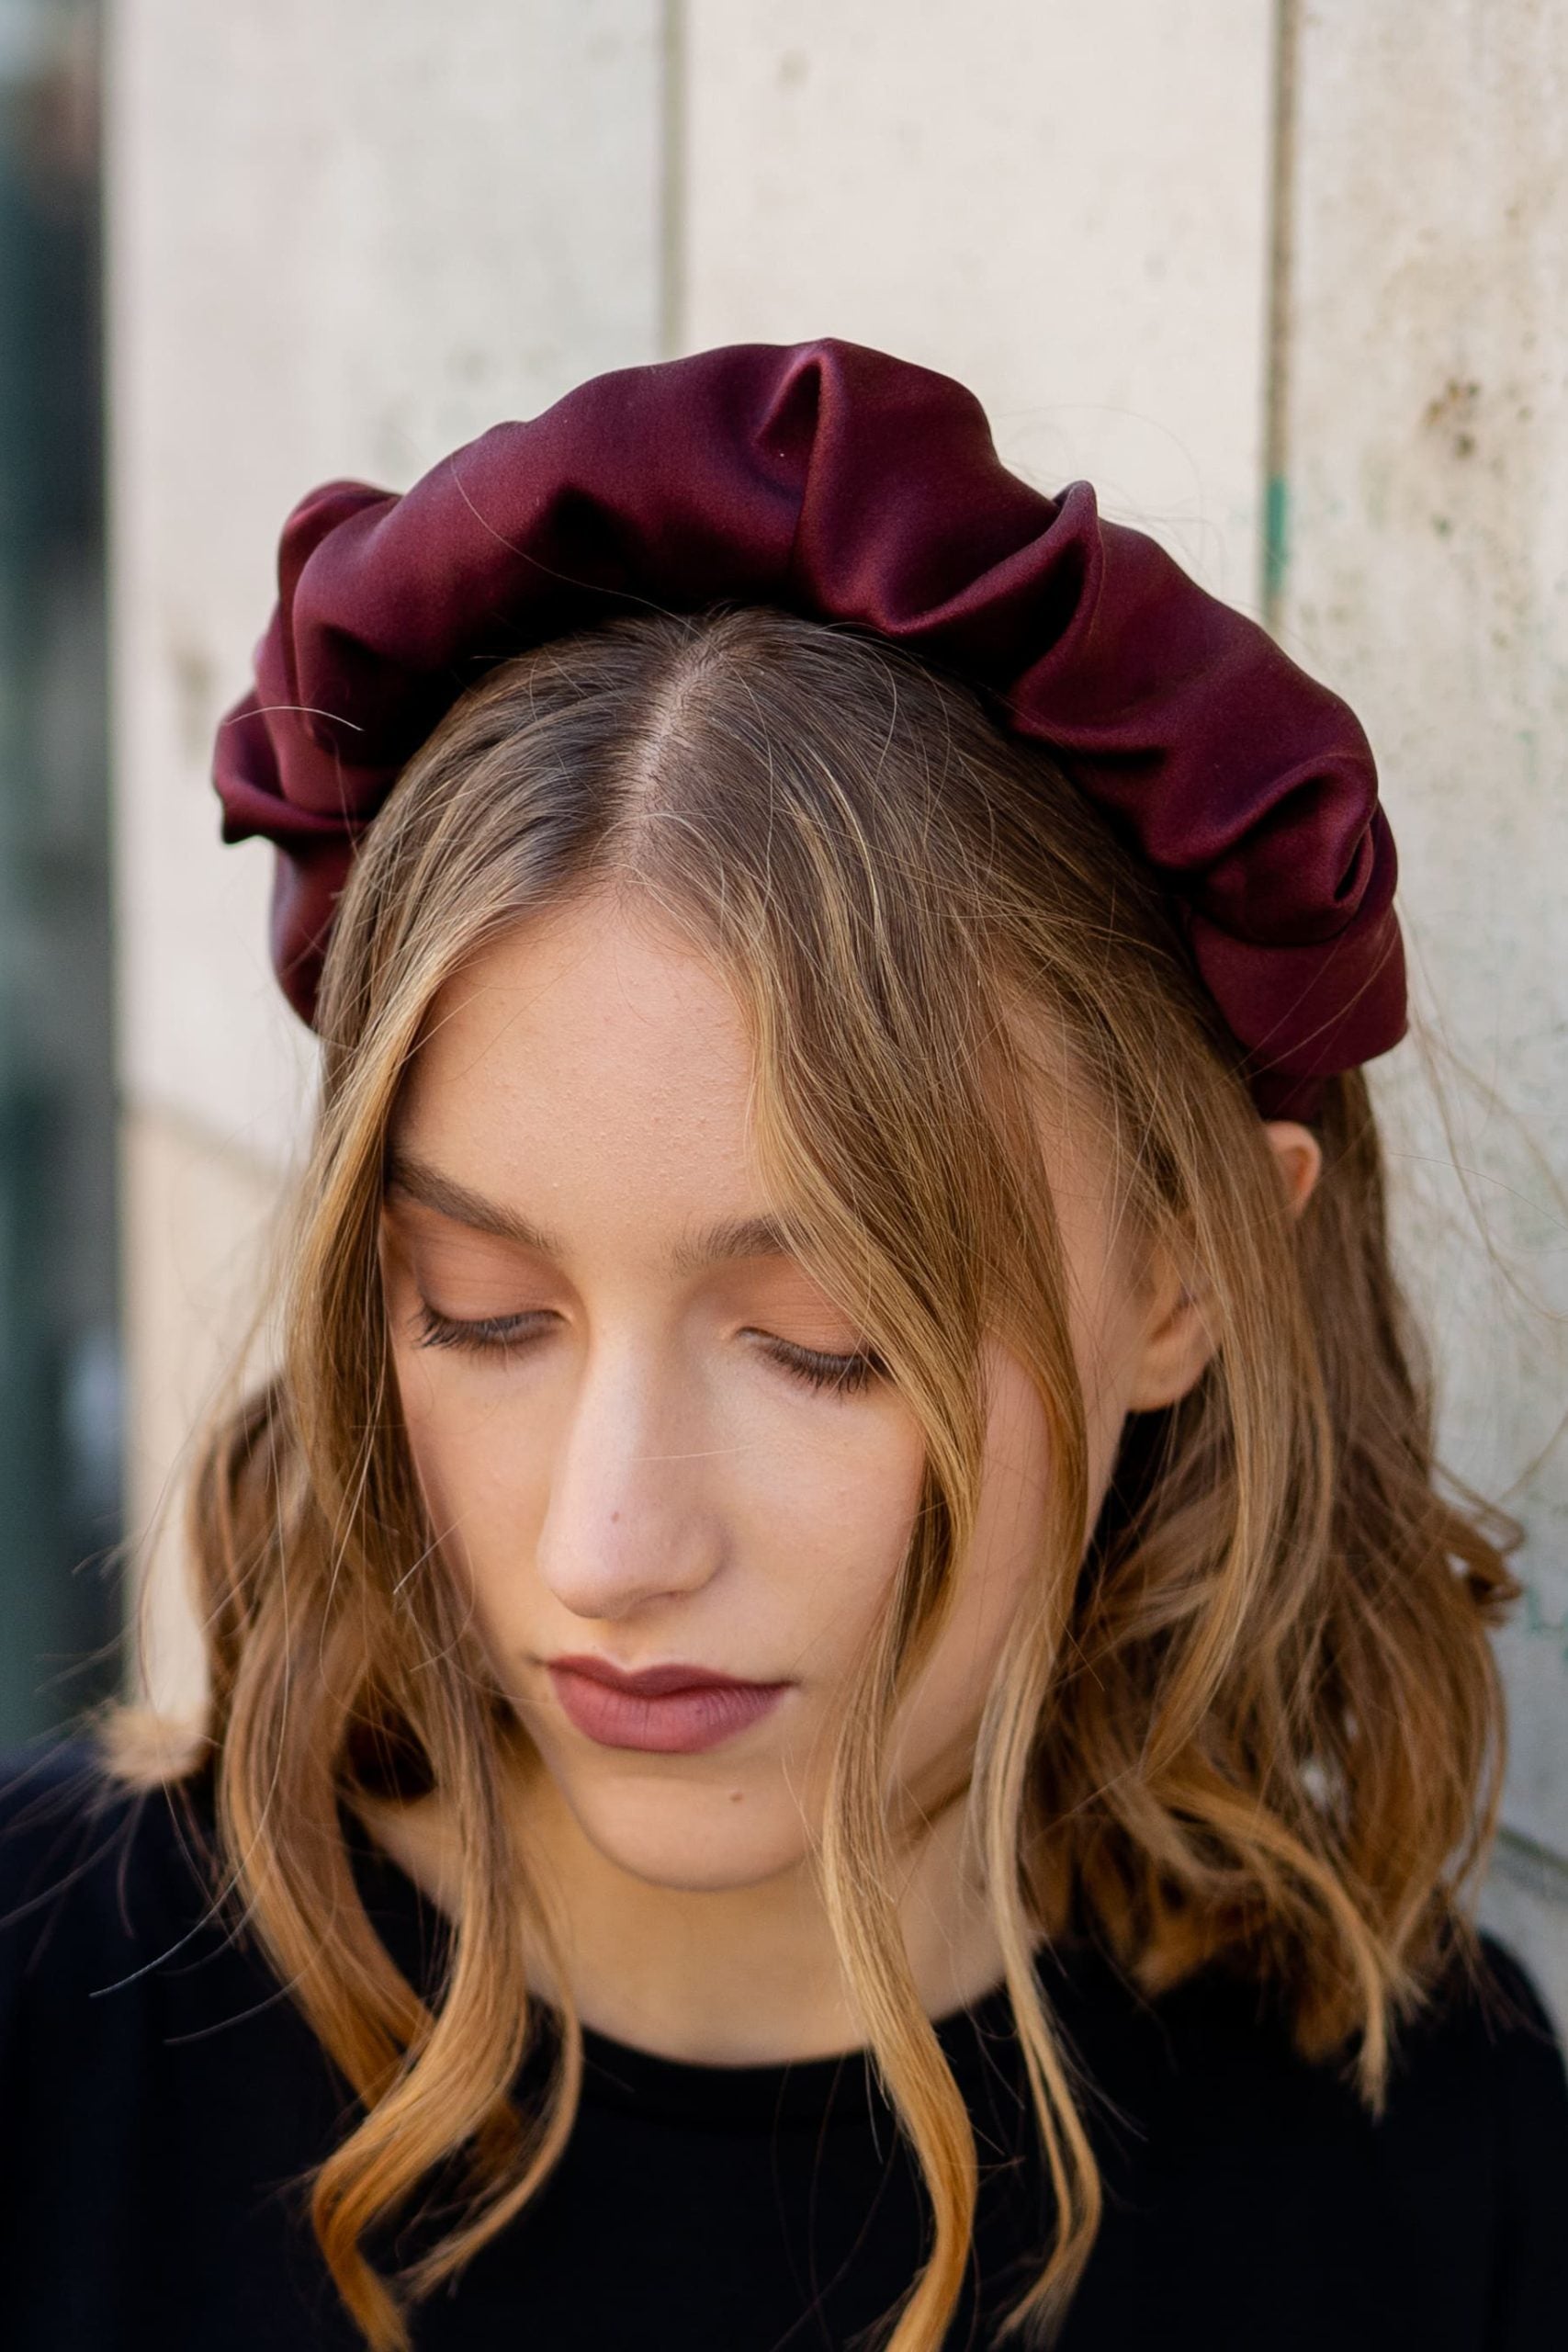 Woman wearing the Frances Headband sewing pattern from JULIANA MARTEJEVS on The Fold Line. A headband pattern made in silk fabrics, featuring foam attached to a headband base then covered in gathered silk fabric.